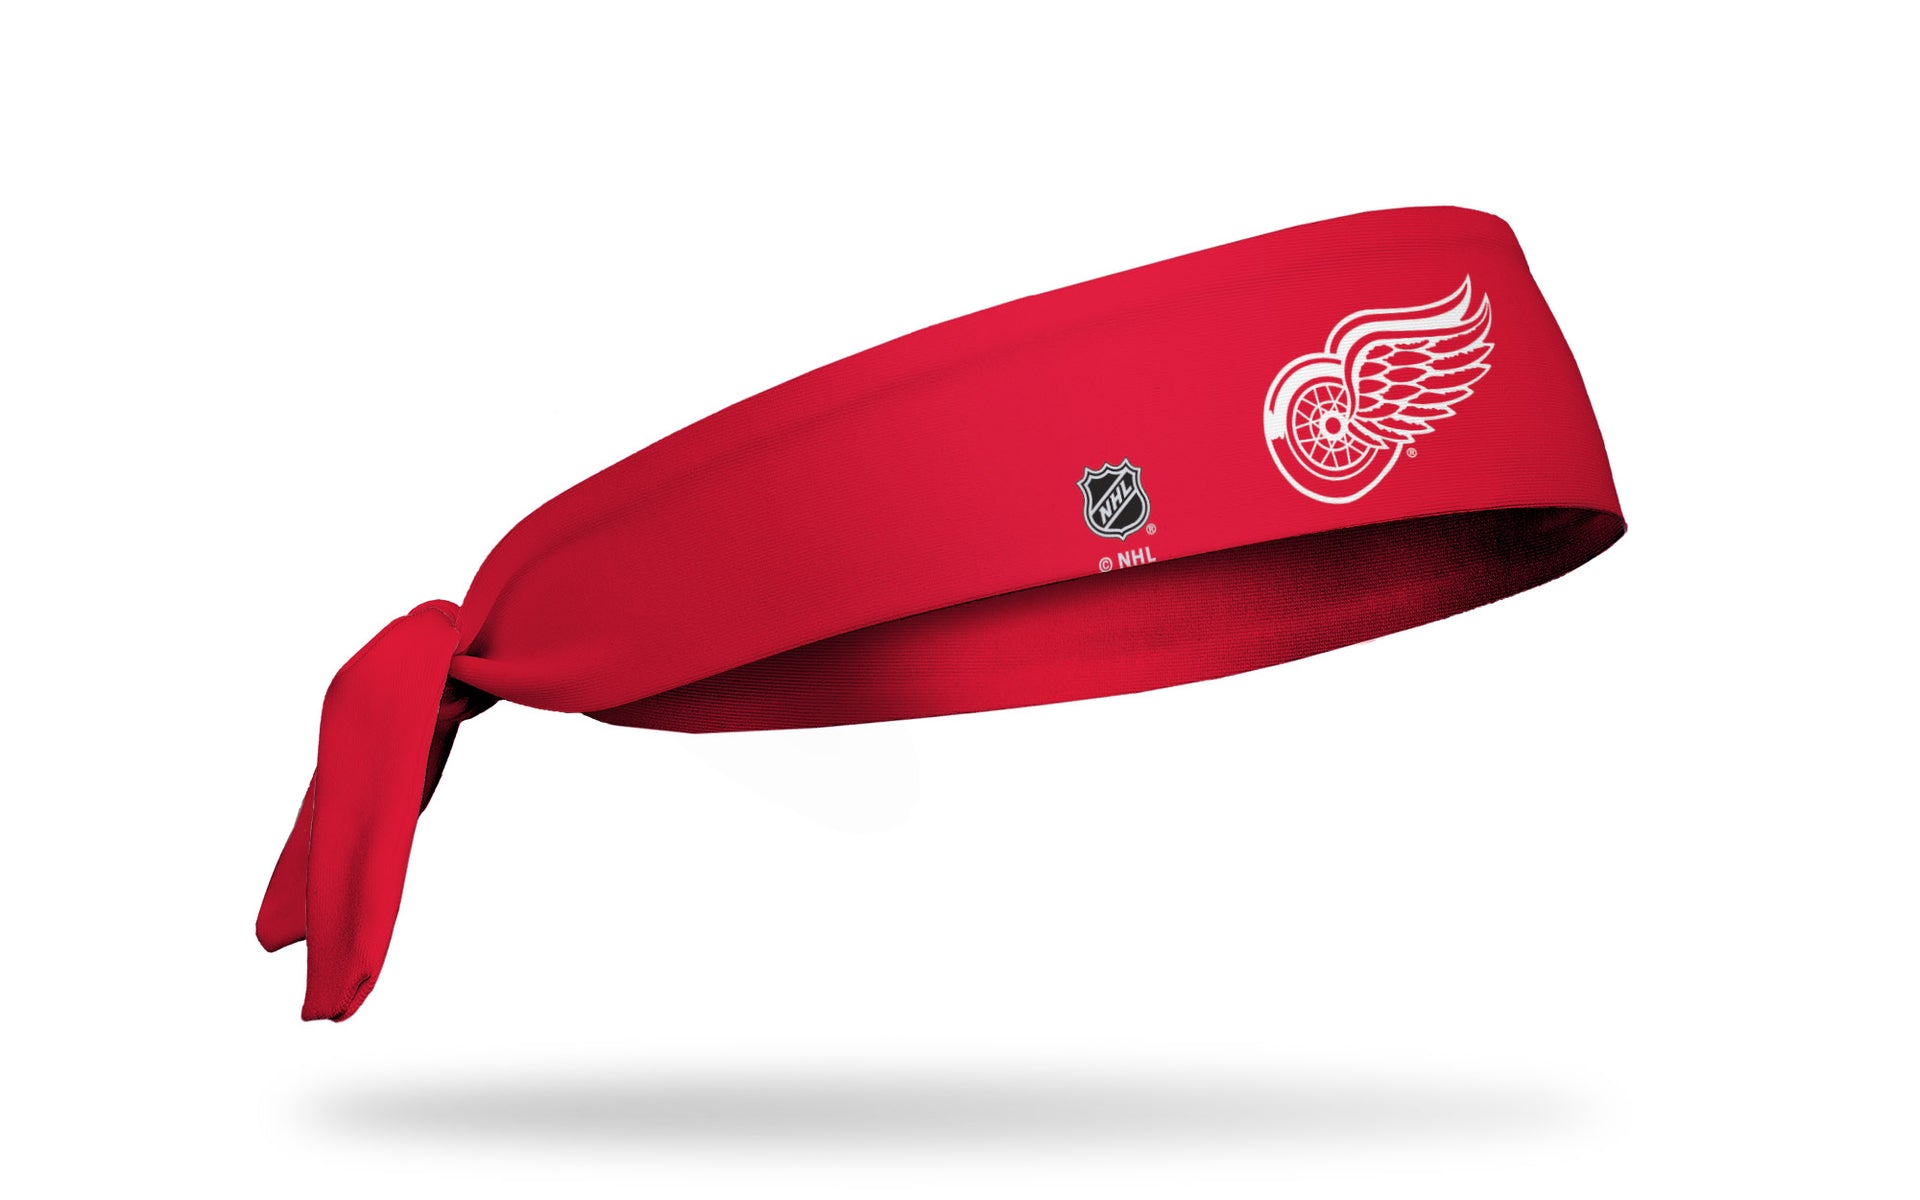 Detroit Red Wings: Logo Red Tie Headband - View 2